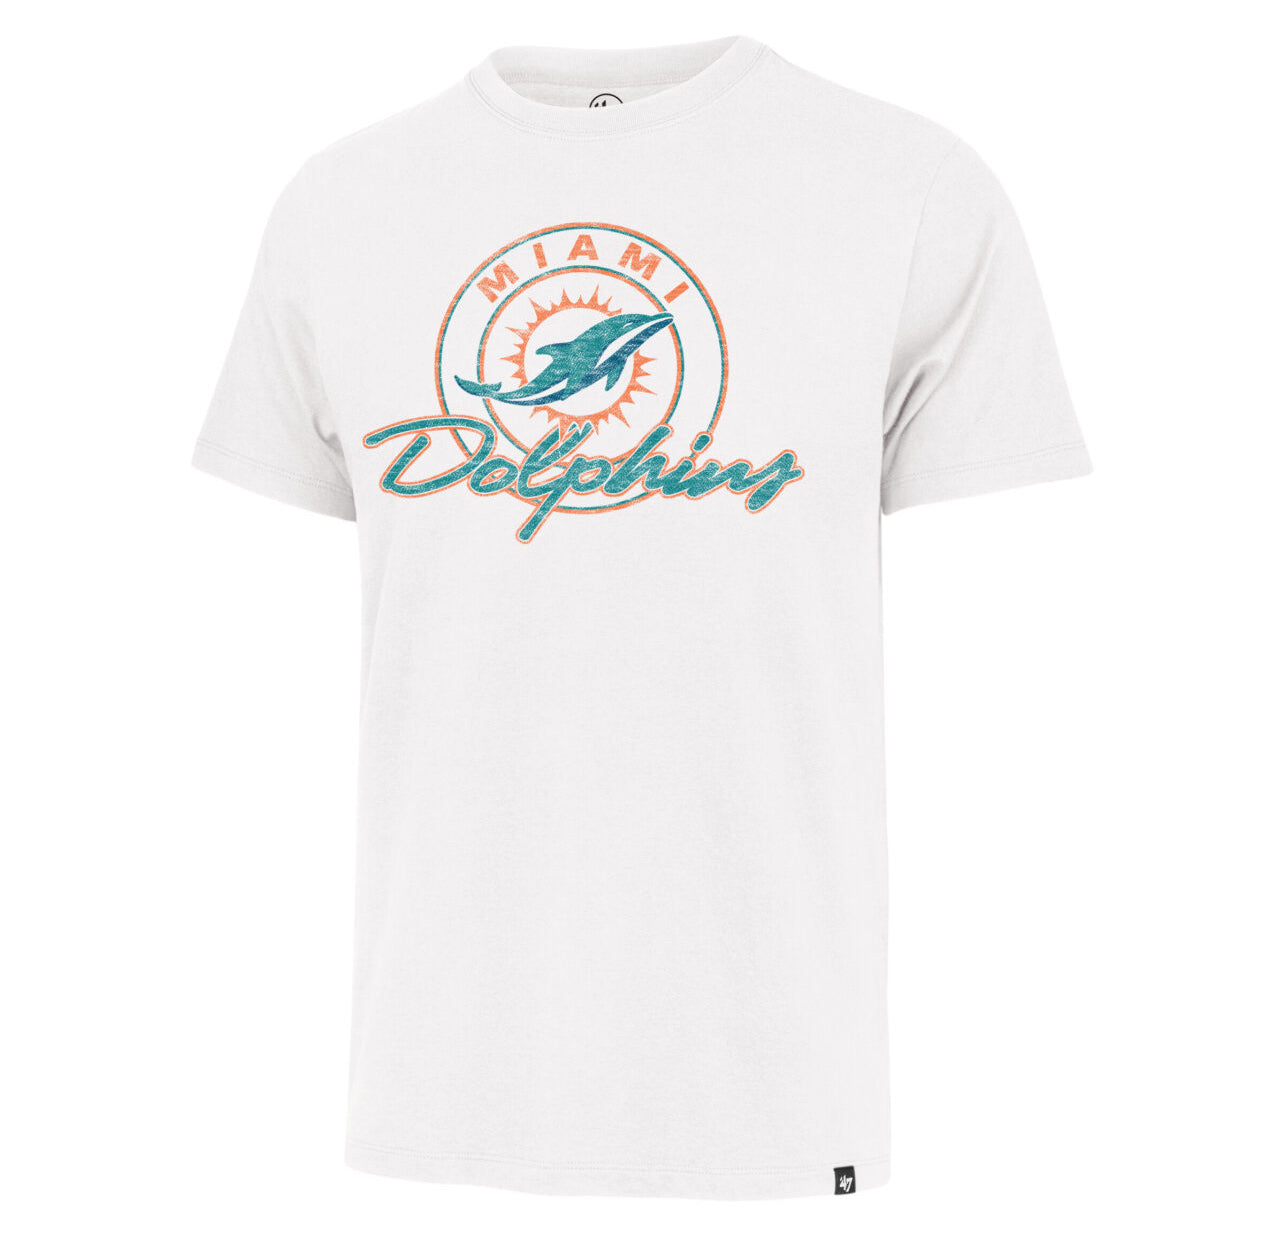 Miami Dolphins '47 Brand Ring Tone Distressed Premier Franklin T-Shirt - White